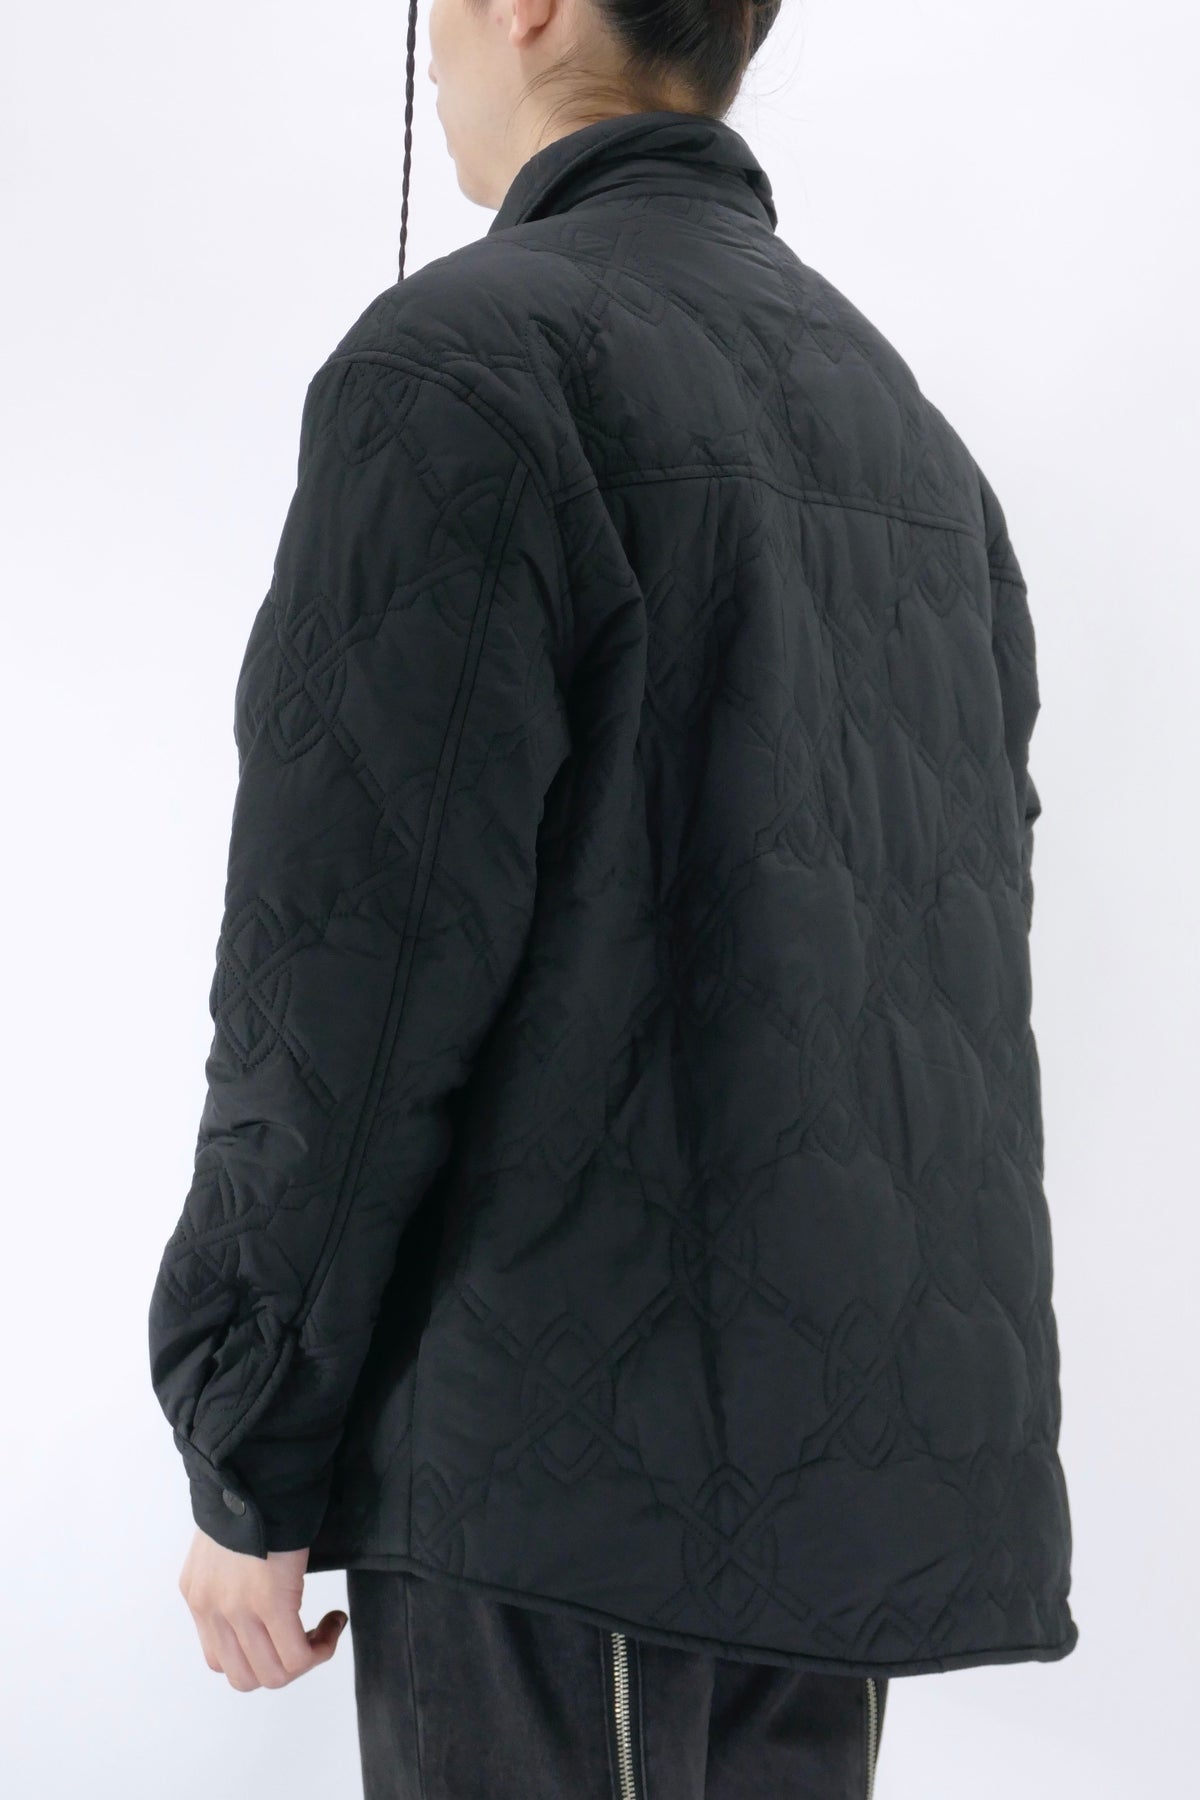 Daily Paper Rajub Quilted Jacket - Back